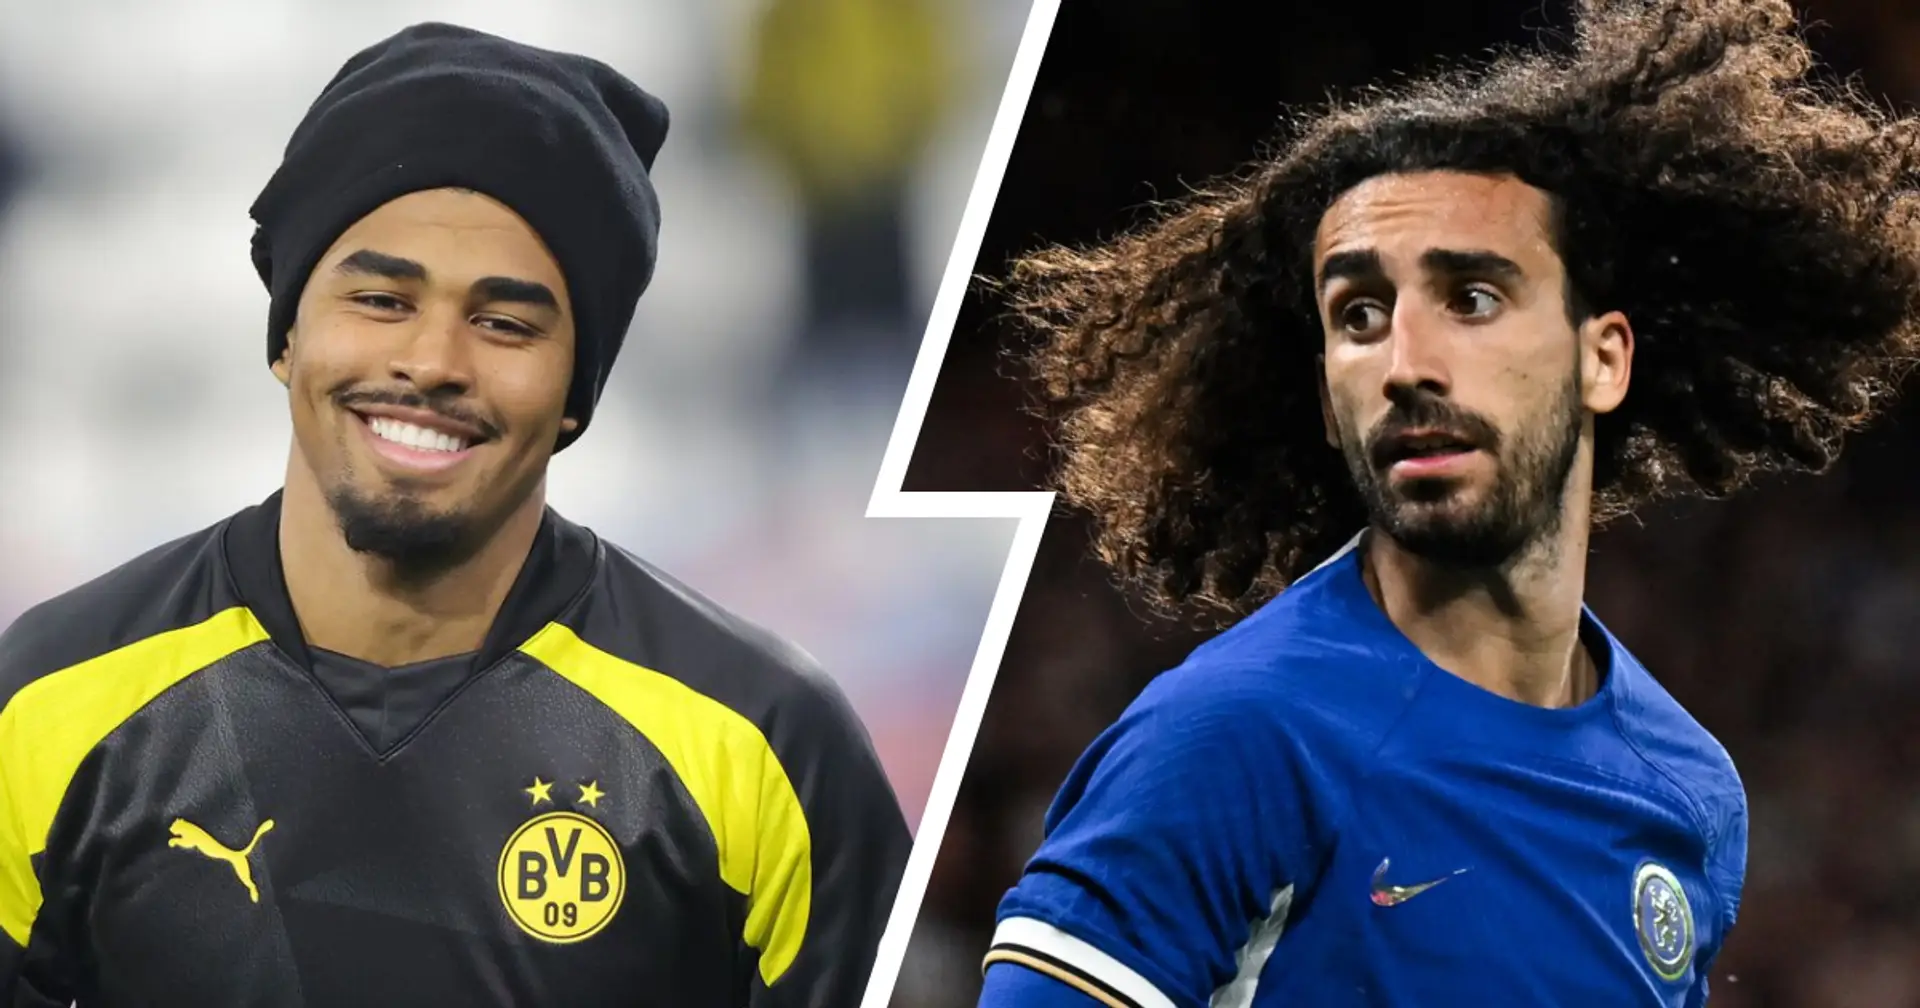 Chelsea hope to sell both Cucurella and Maatsen, identified potential replacement (reliability: 5 stars)